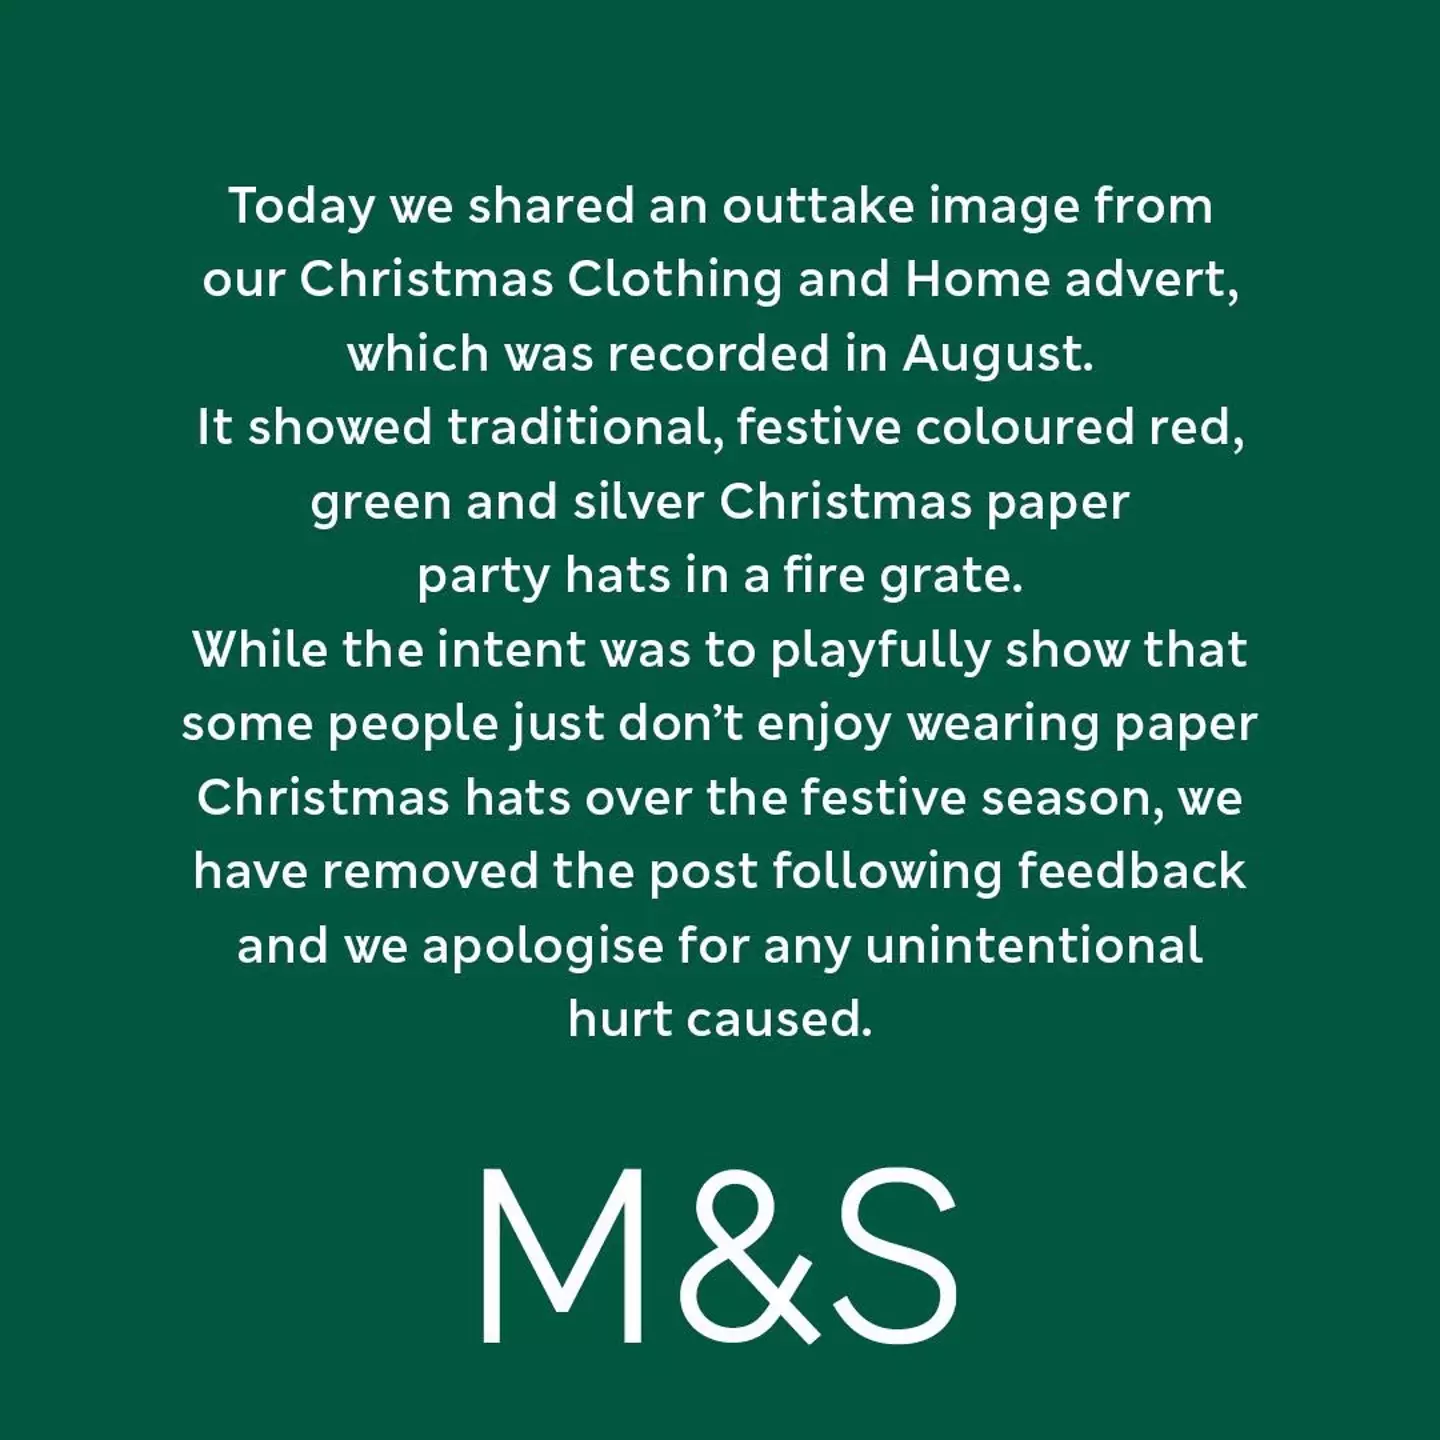 M&S apologised for the post.